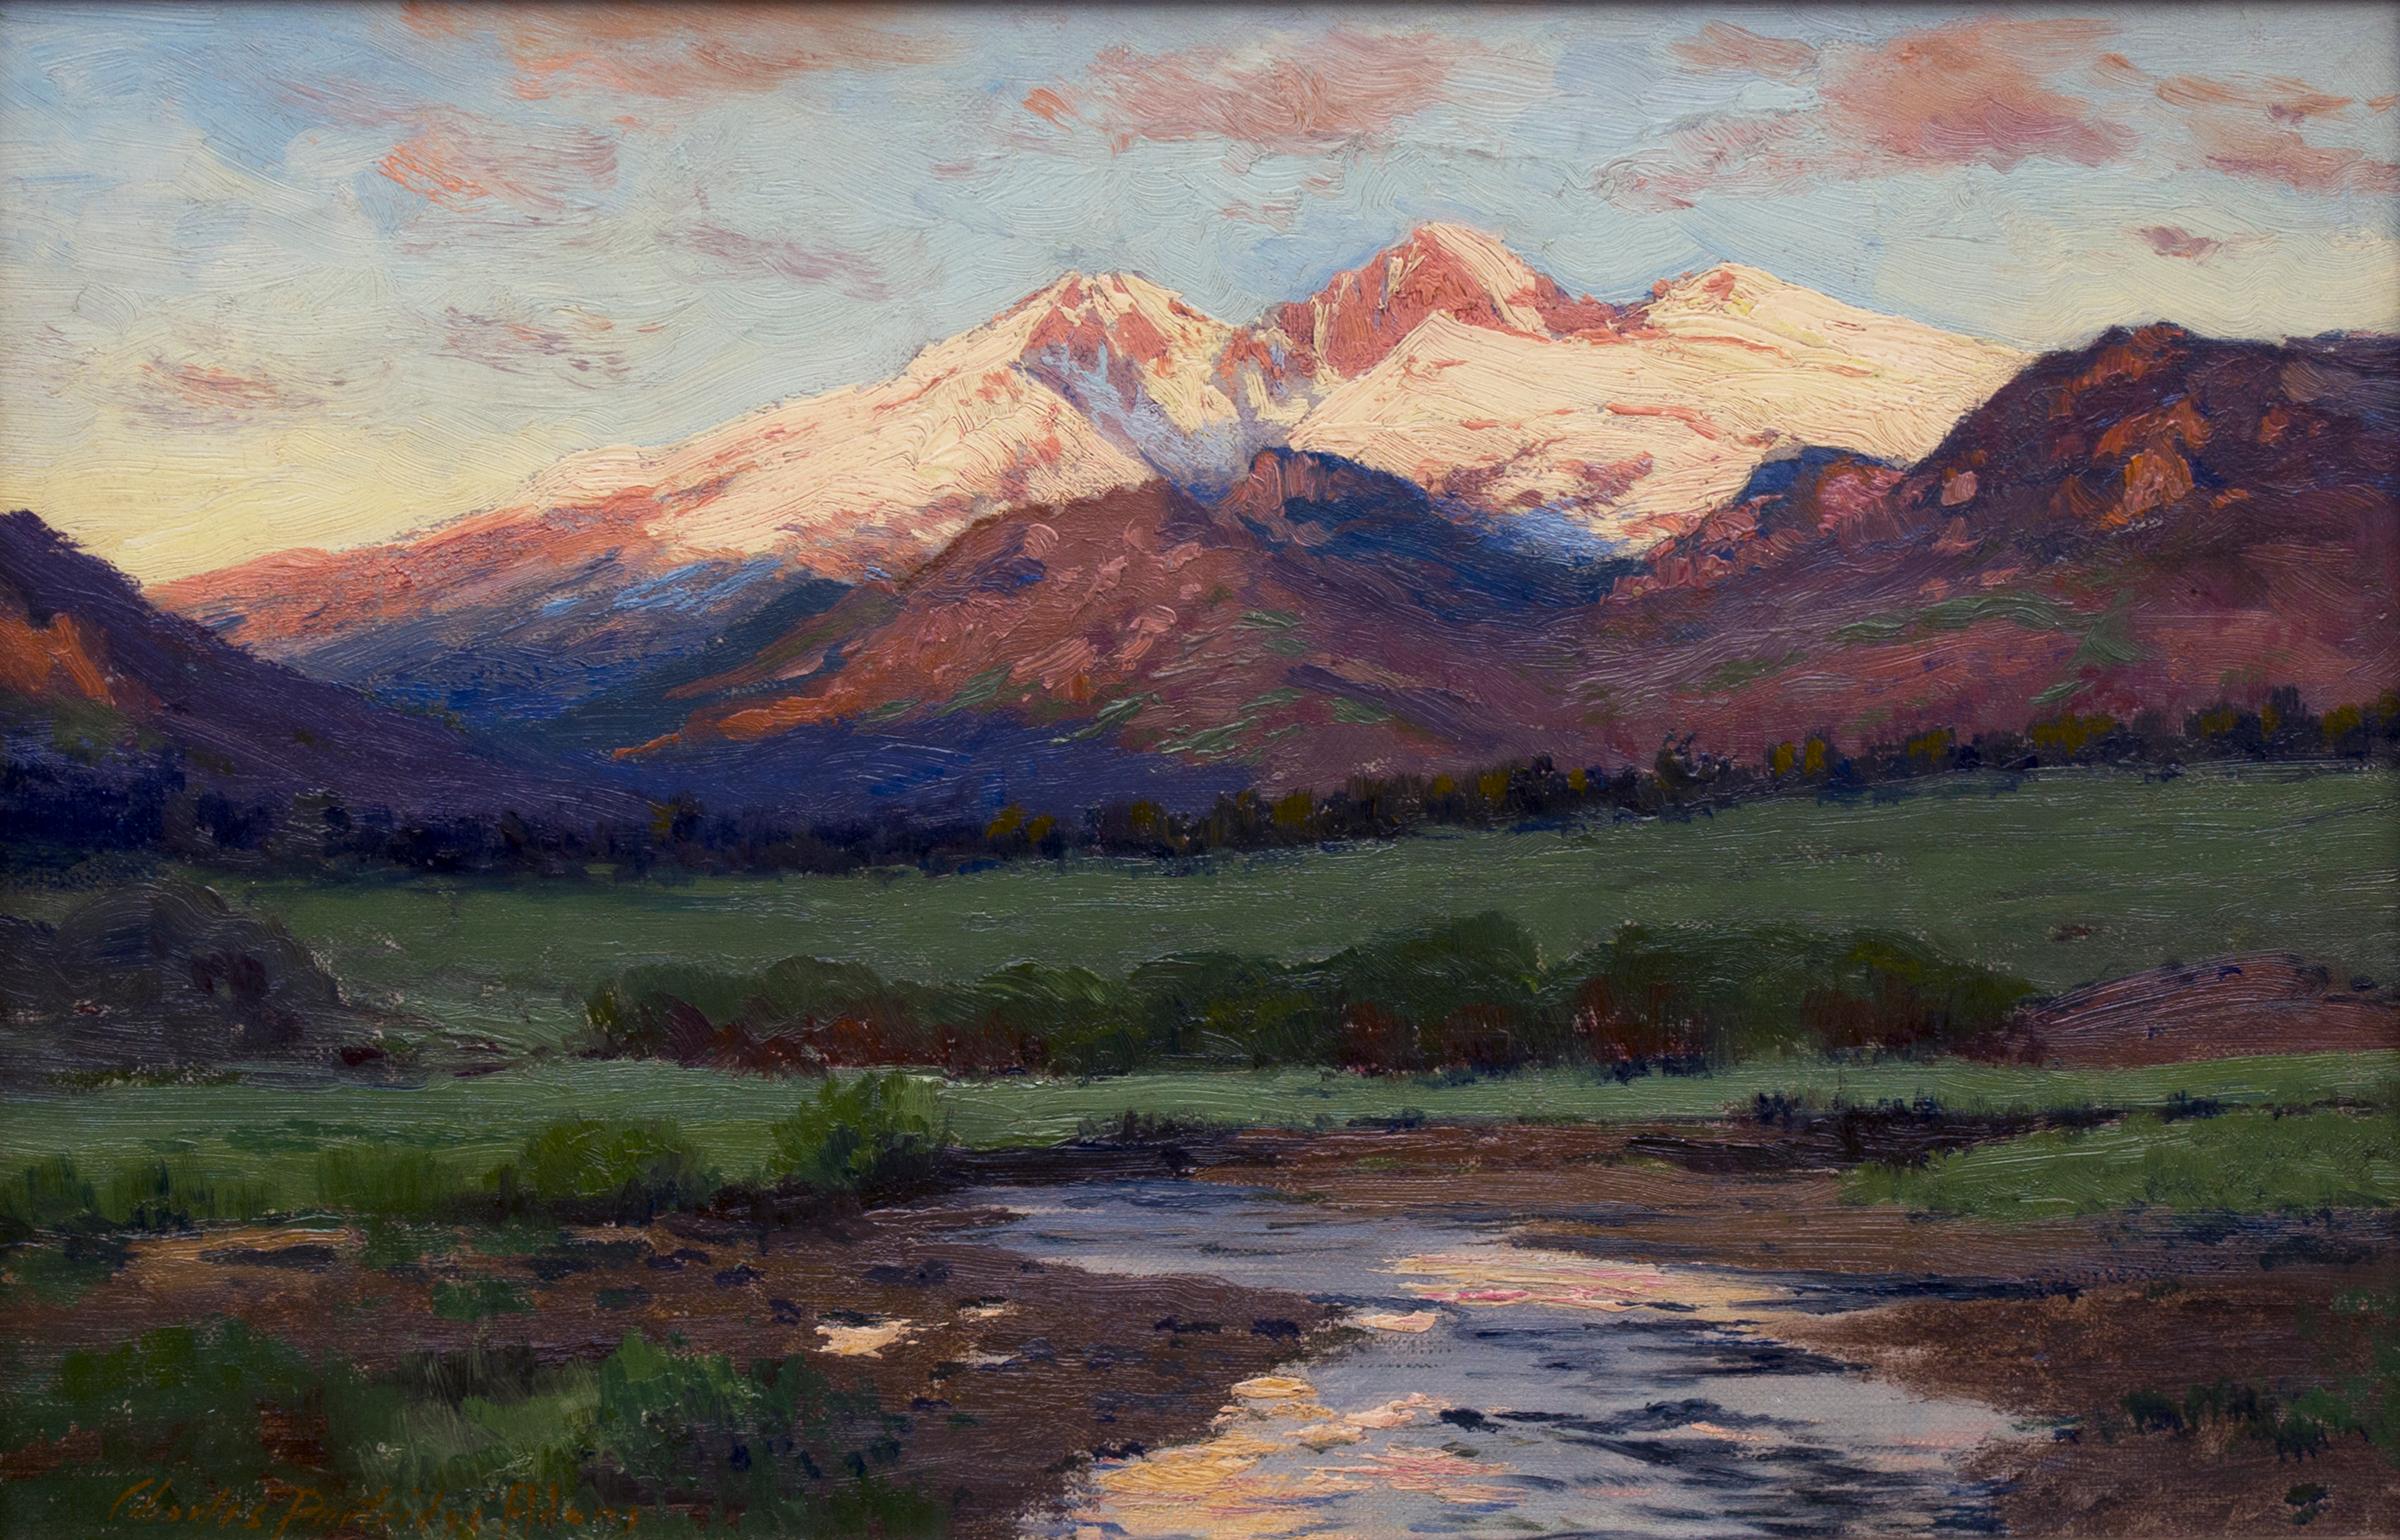 Untitled Landscape (Twilight over Longs Peak from near Estes Park, Colorado) - Painting by Charles Partridge Adams